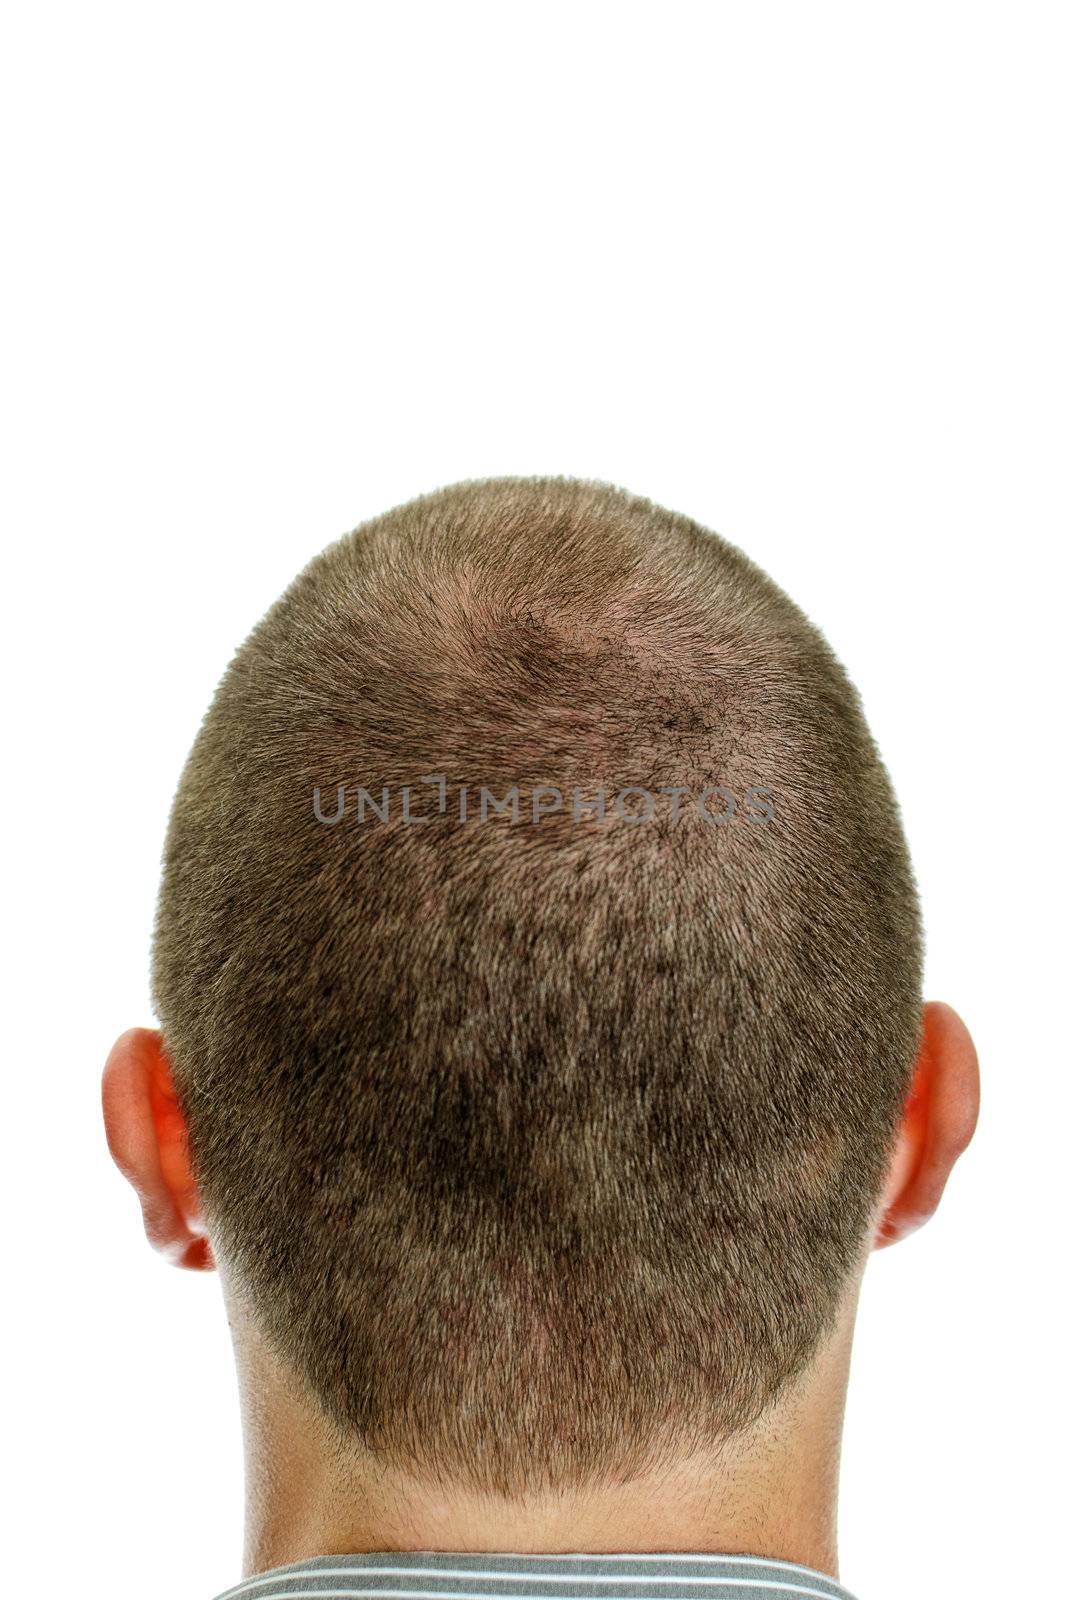 Closeup of the back of mans head. Isolated on white.